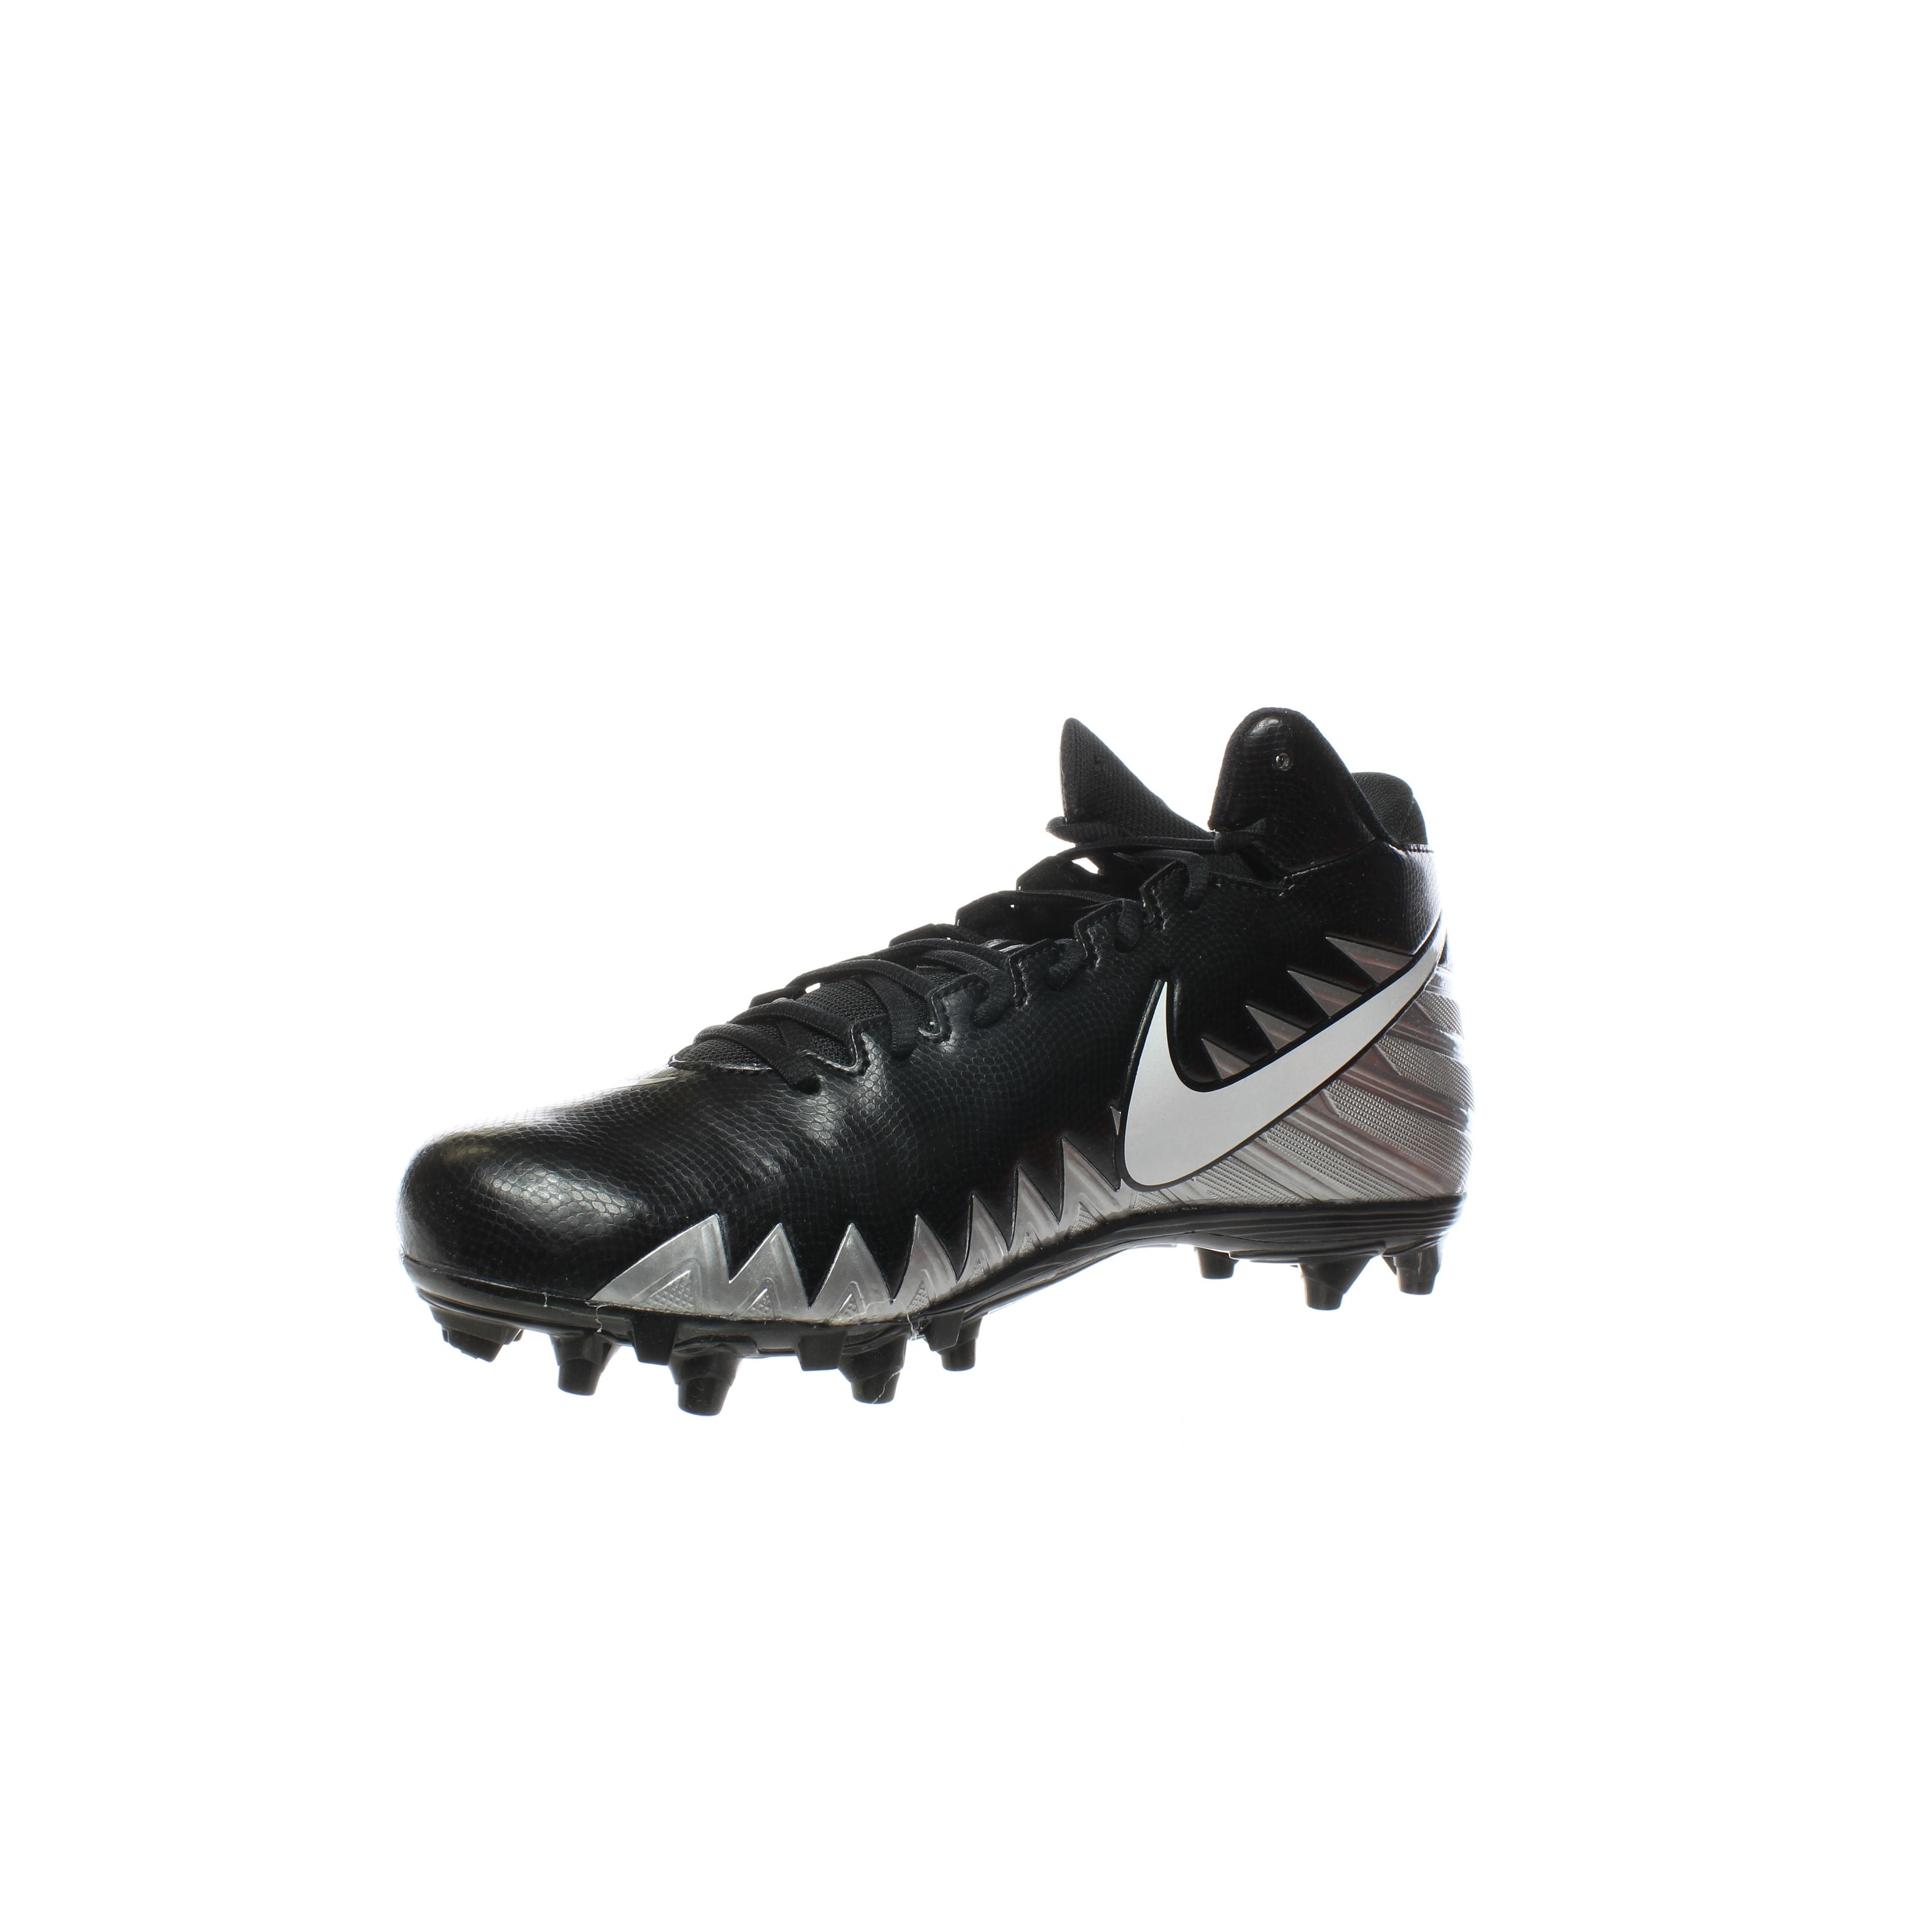 football cleats size 11.5